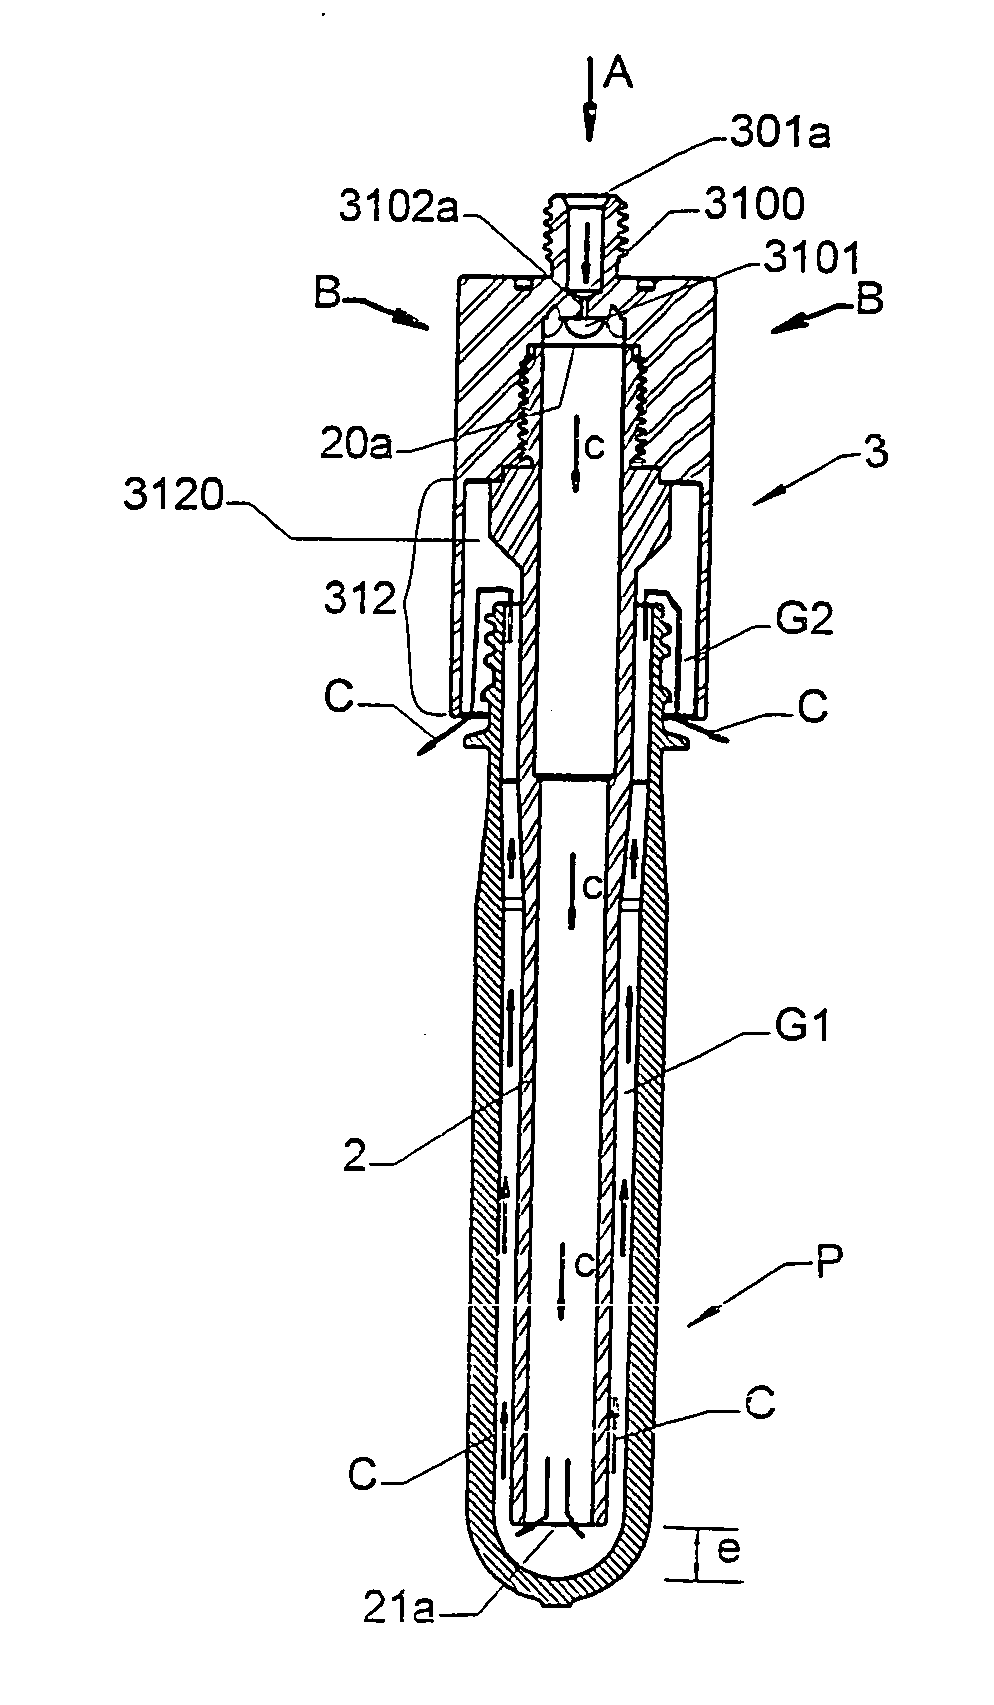 Cooling Assembly Comprising Several Cooling Pins For Cooling Hollow Moulded Plastic Pieces By Means Of A Cooling Fluid Flow Boosted By Venturi Effect